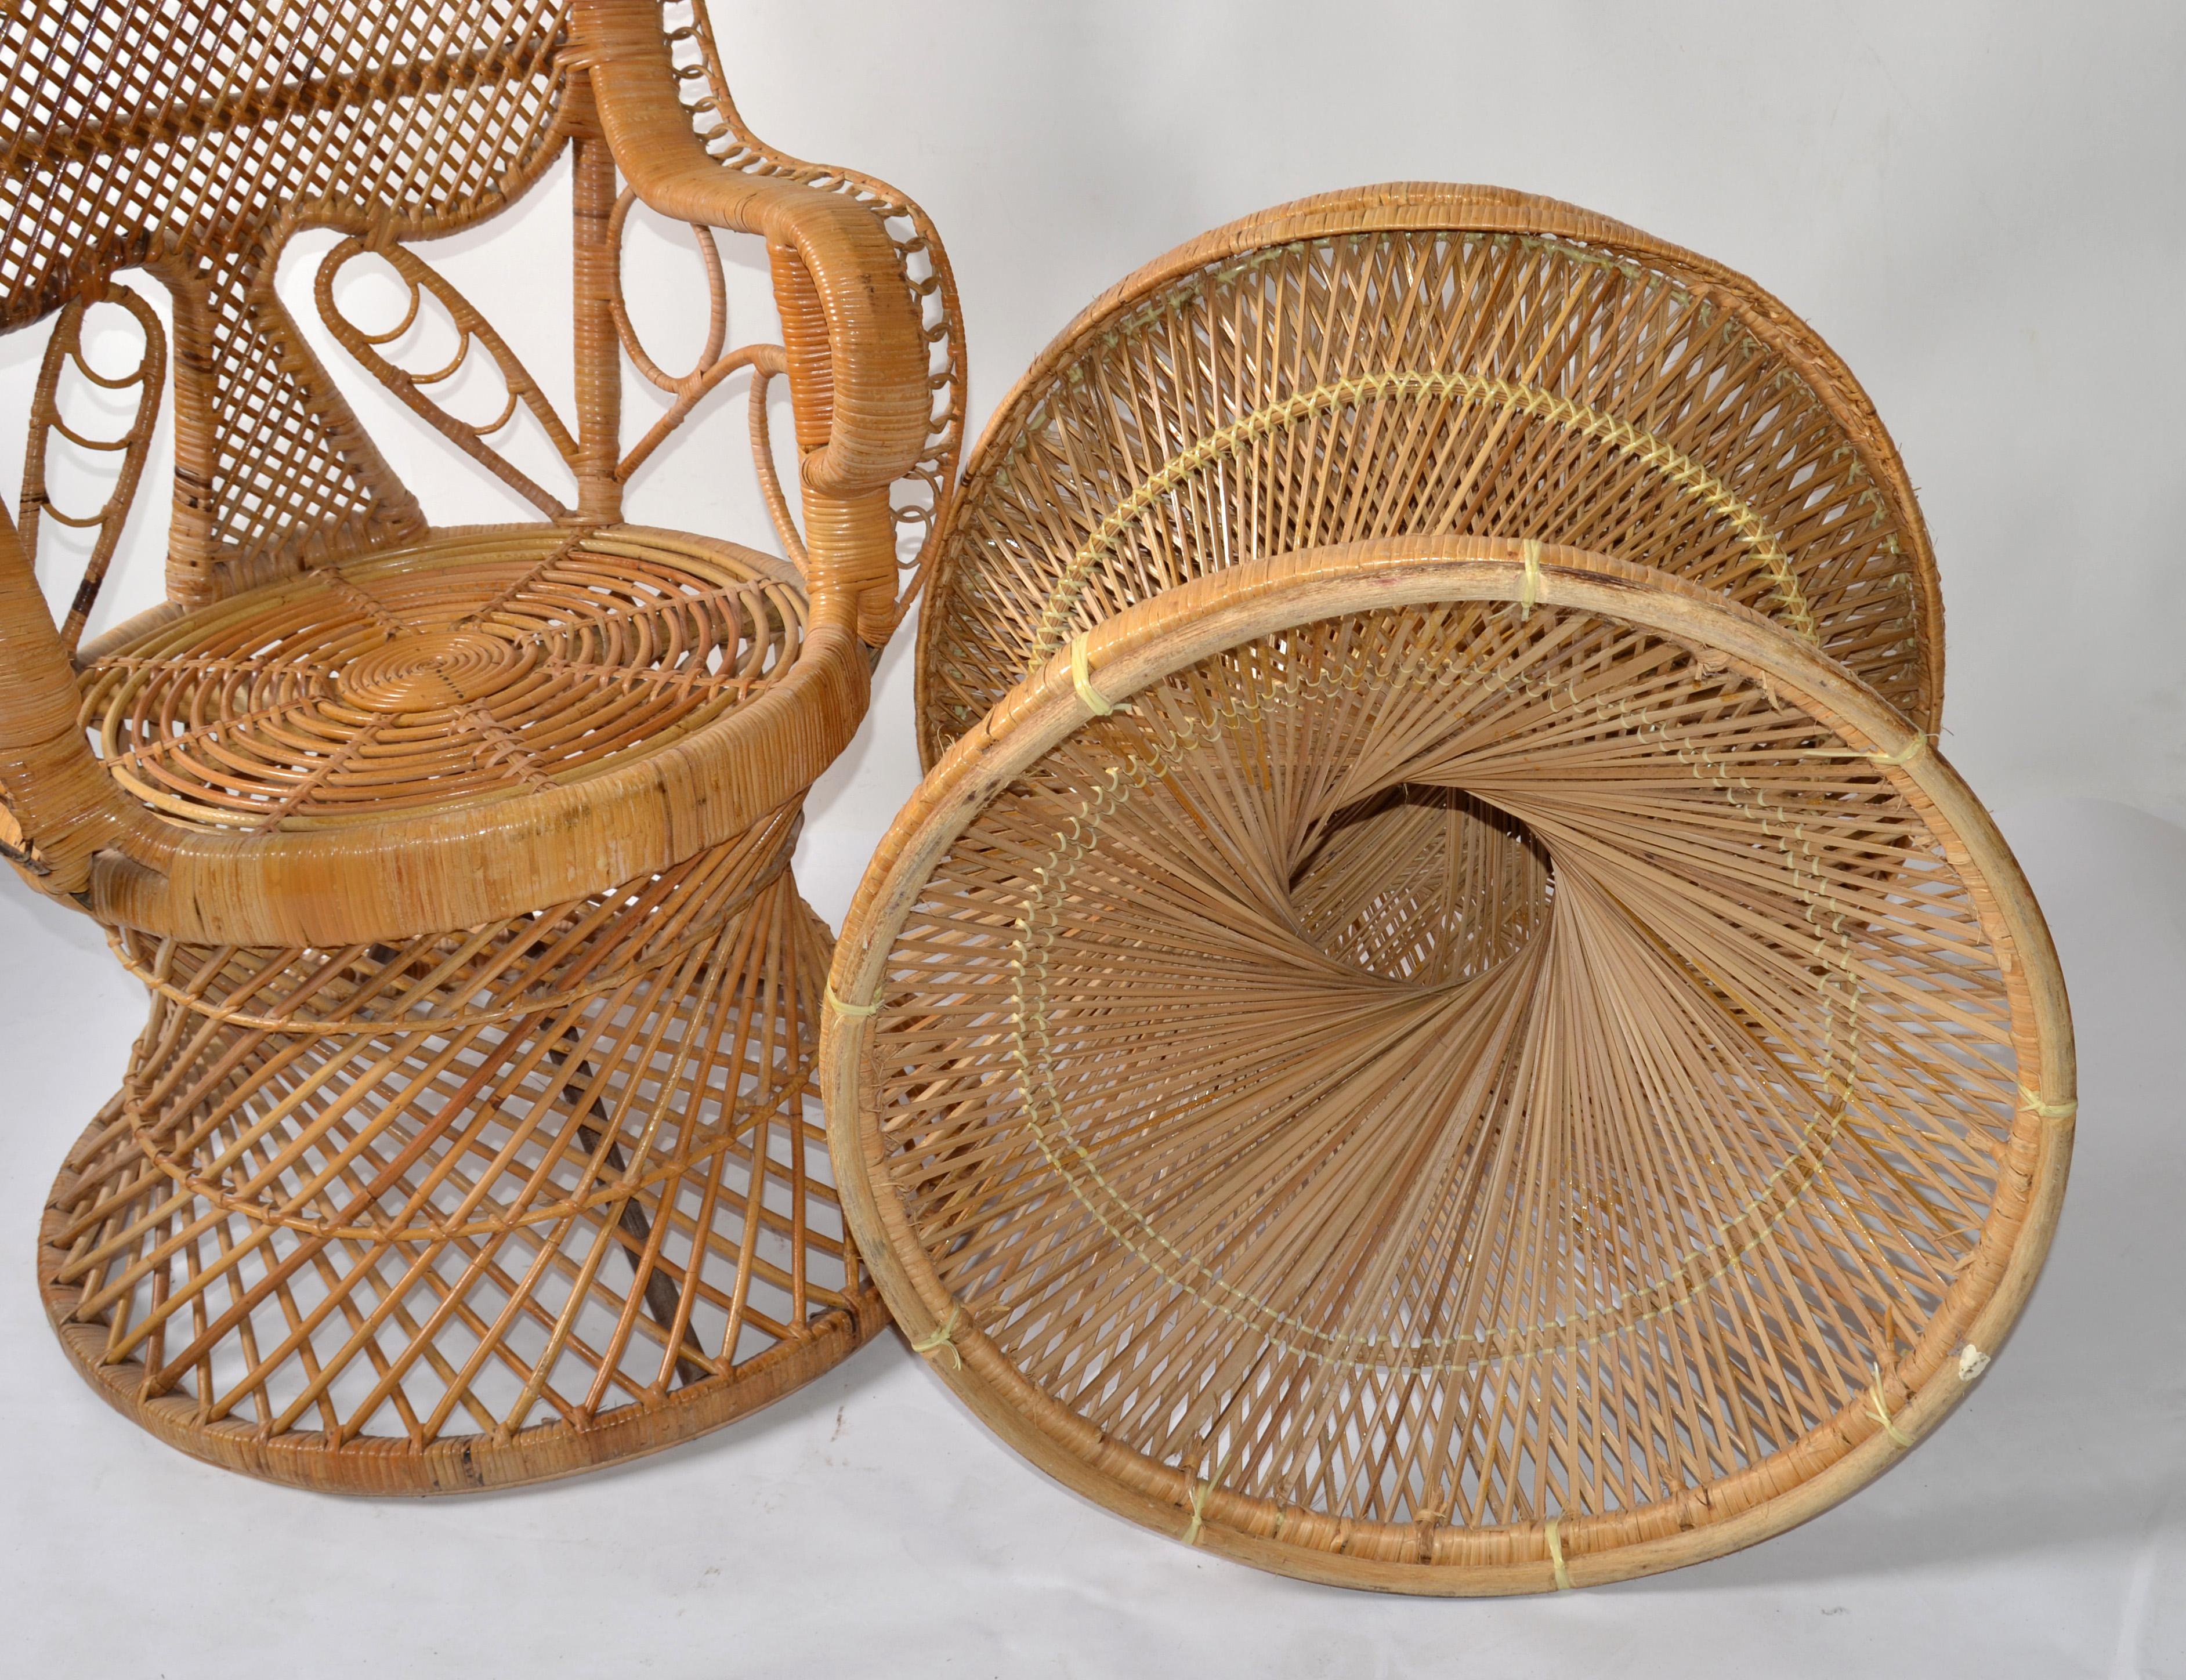 Coastal Vintage Round Rattan Accent Table Hand-Woven Wicker Caning Peacock Chair en vente 4